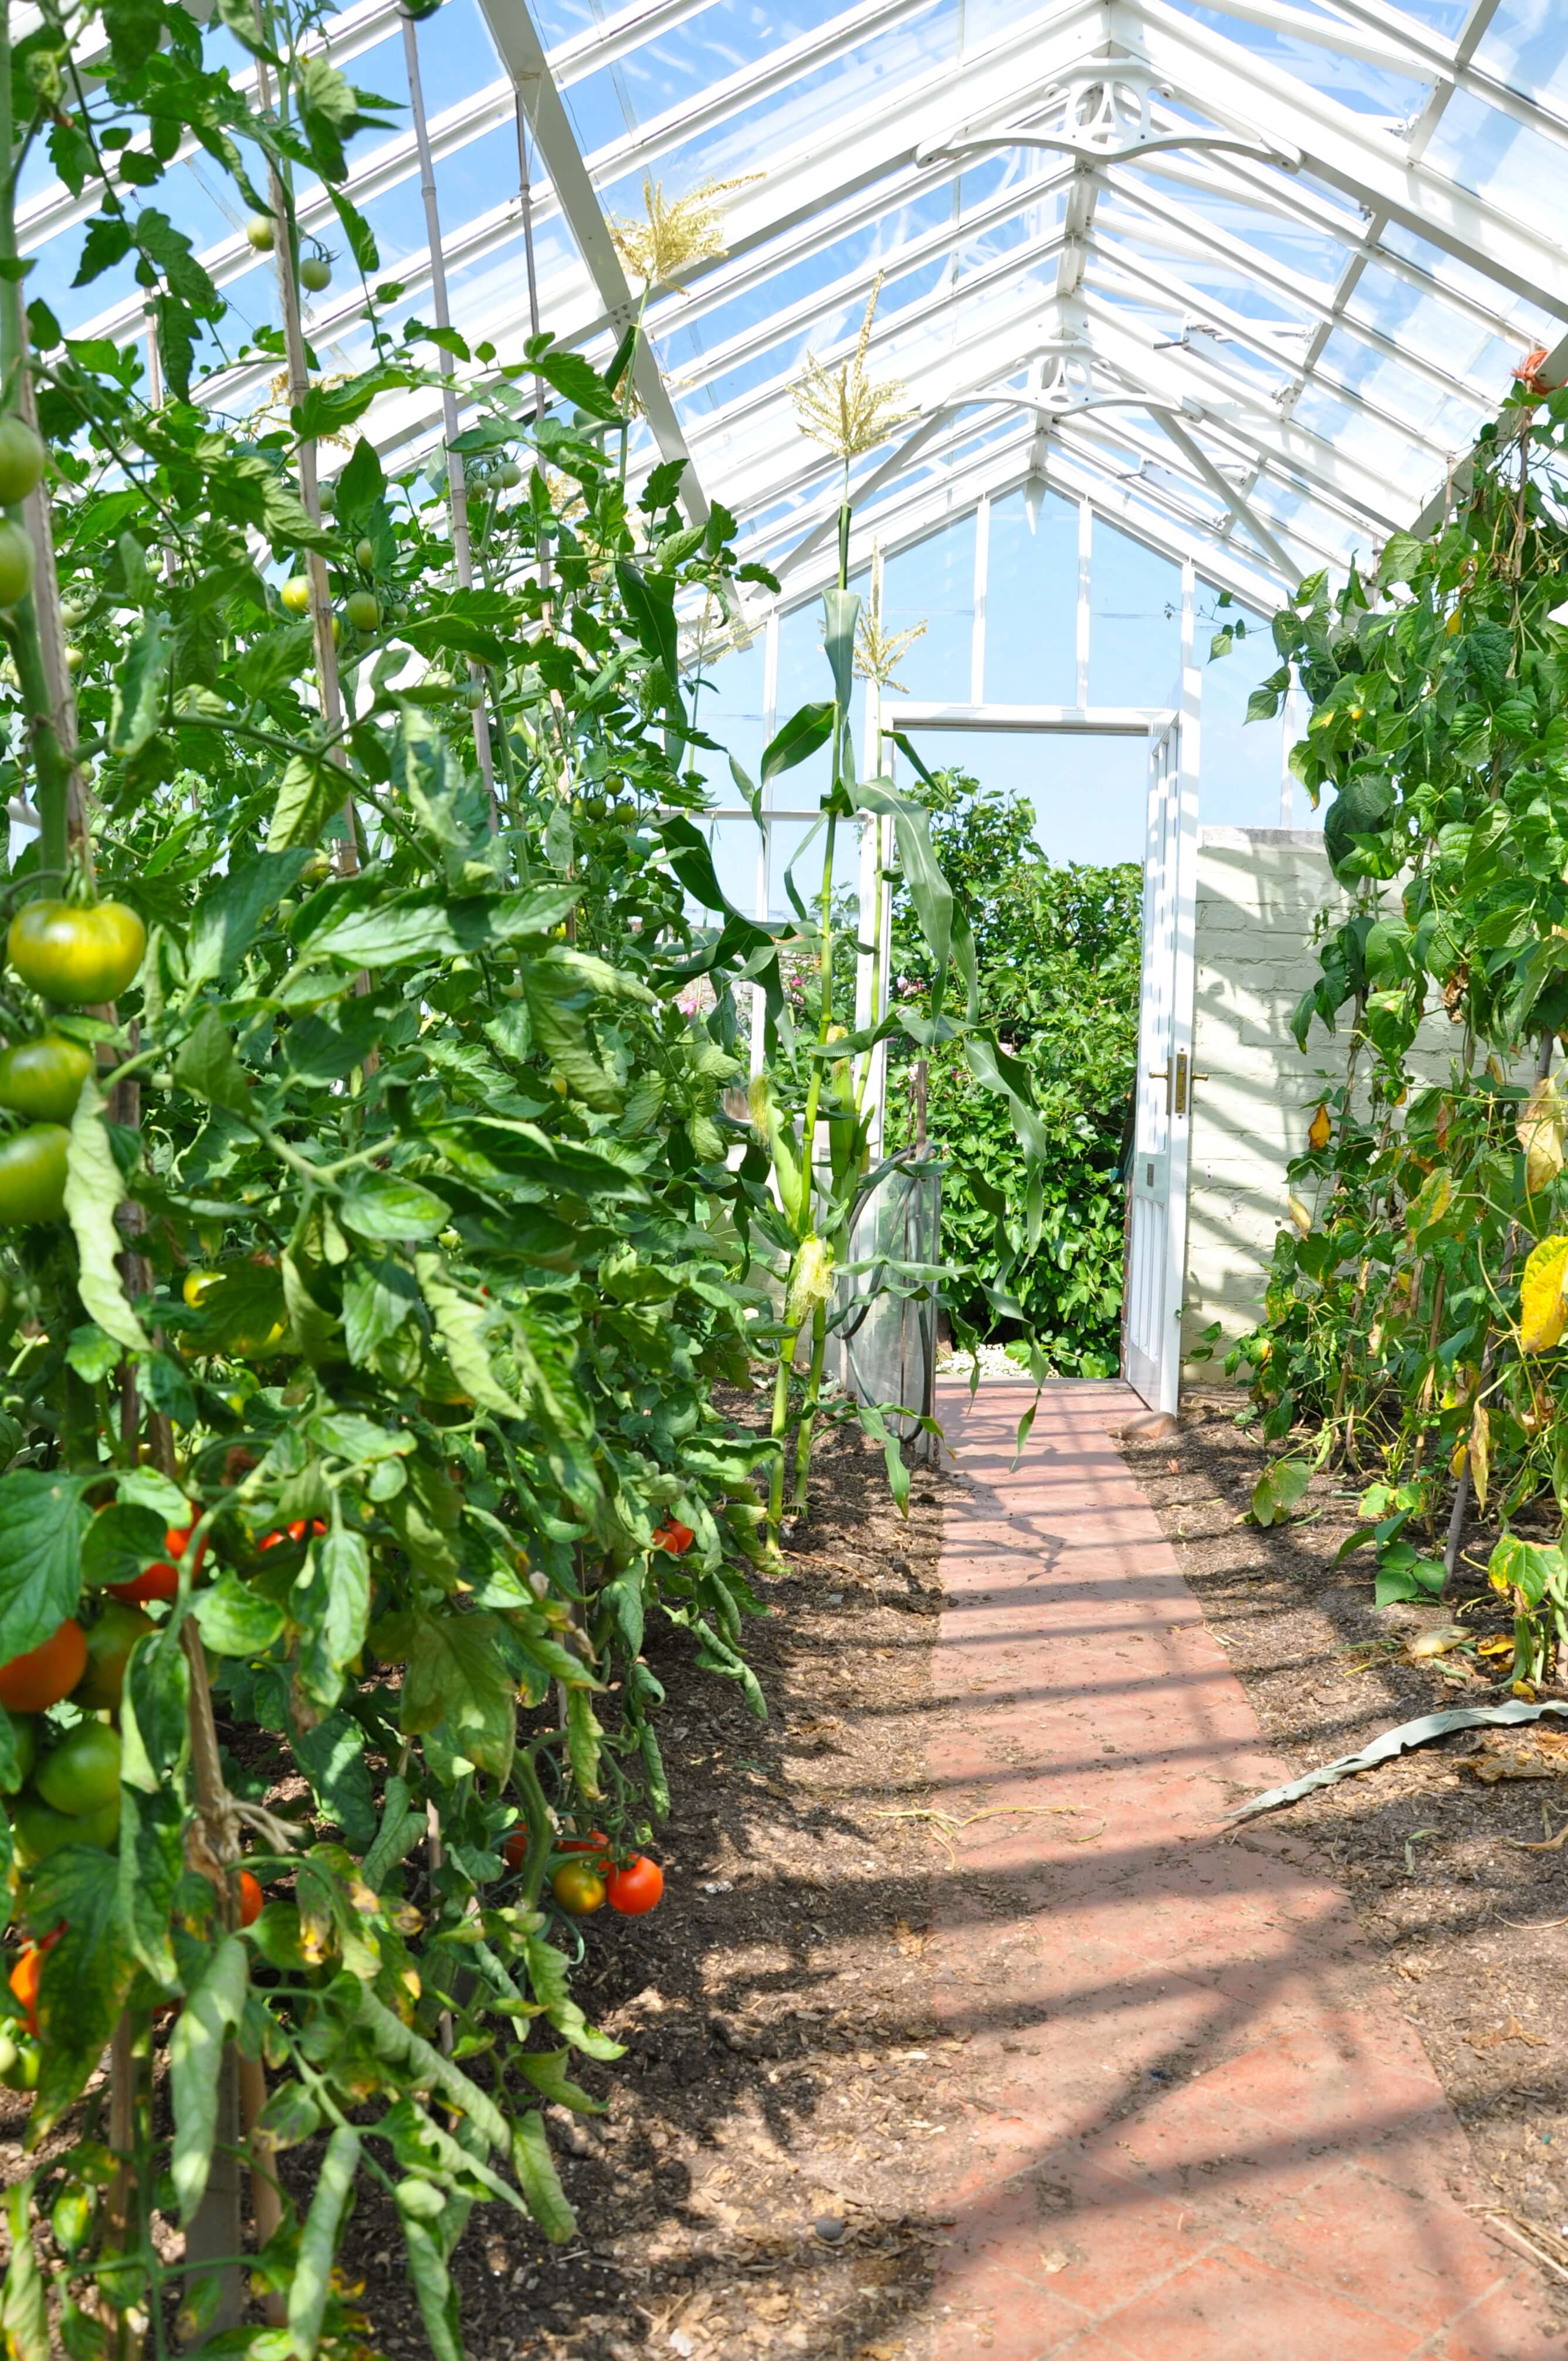 Tomato plant growing inside greenhouse